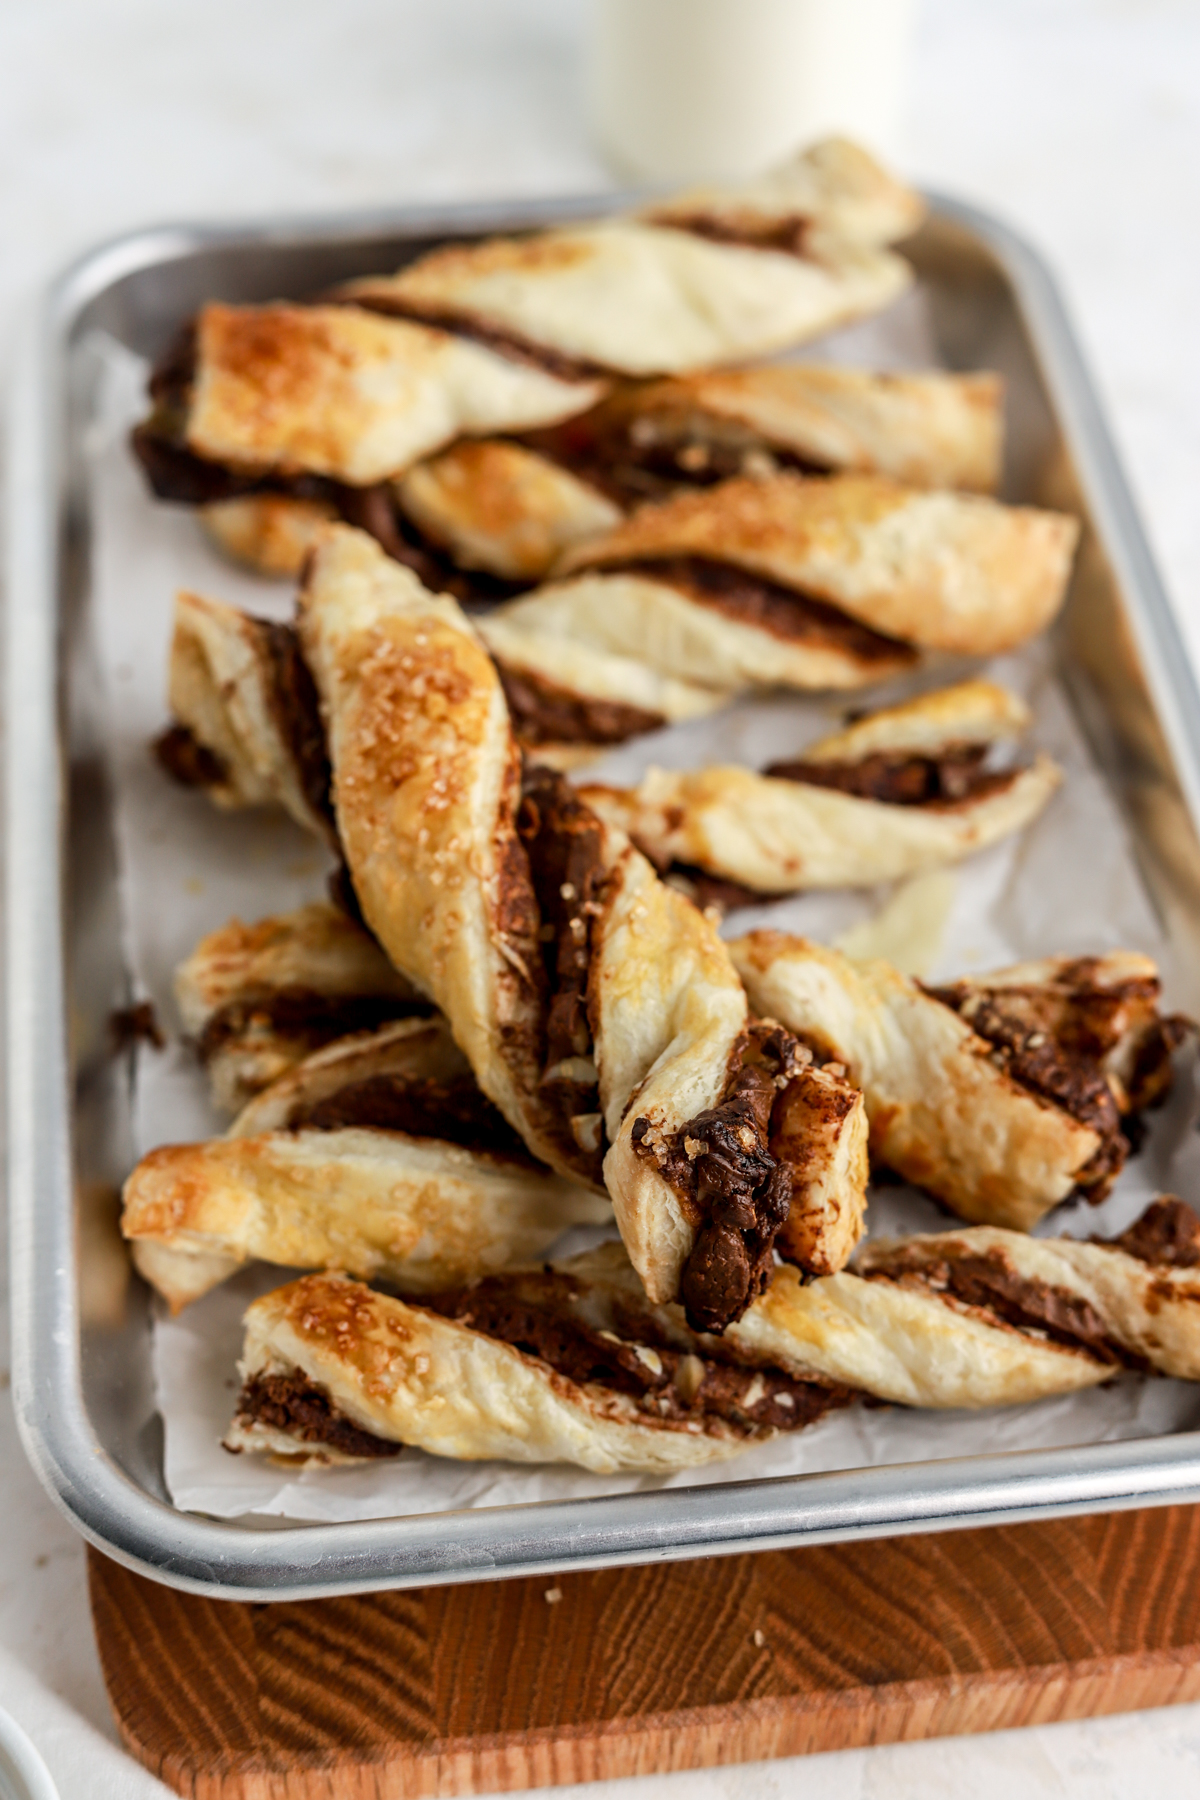 Puff pastry twists filled with chocolate on a small baking tray.